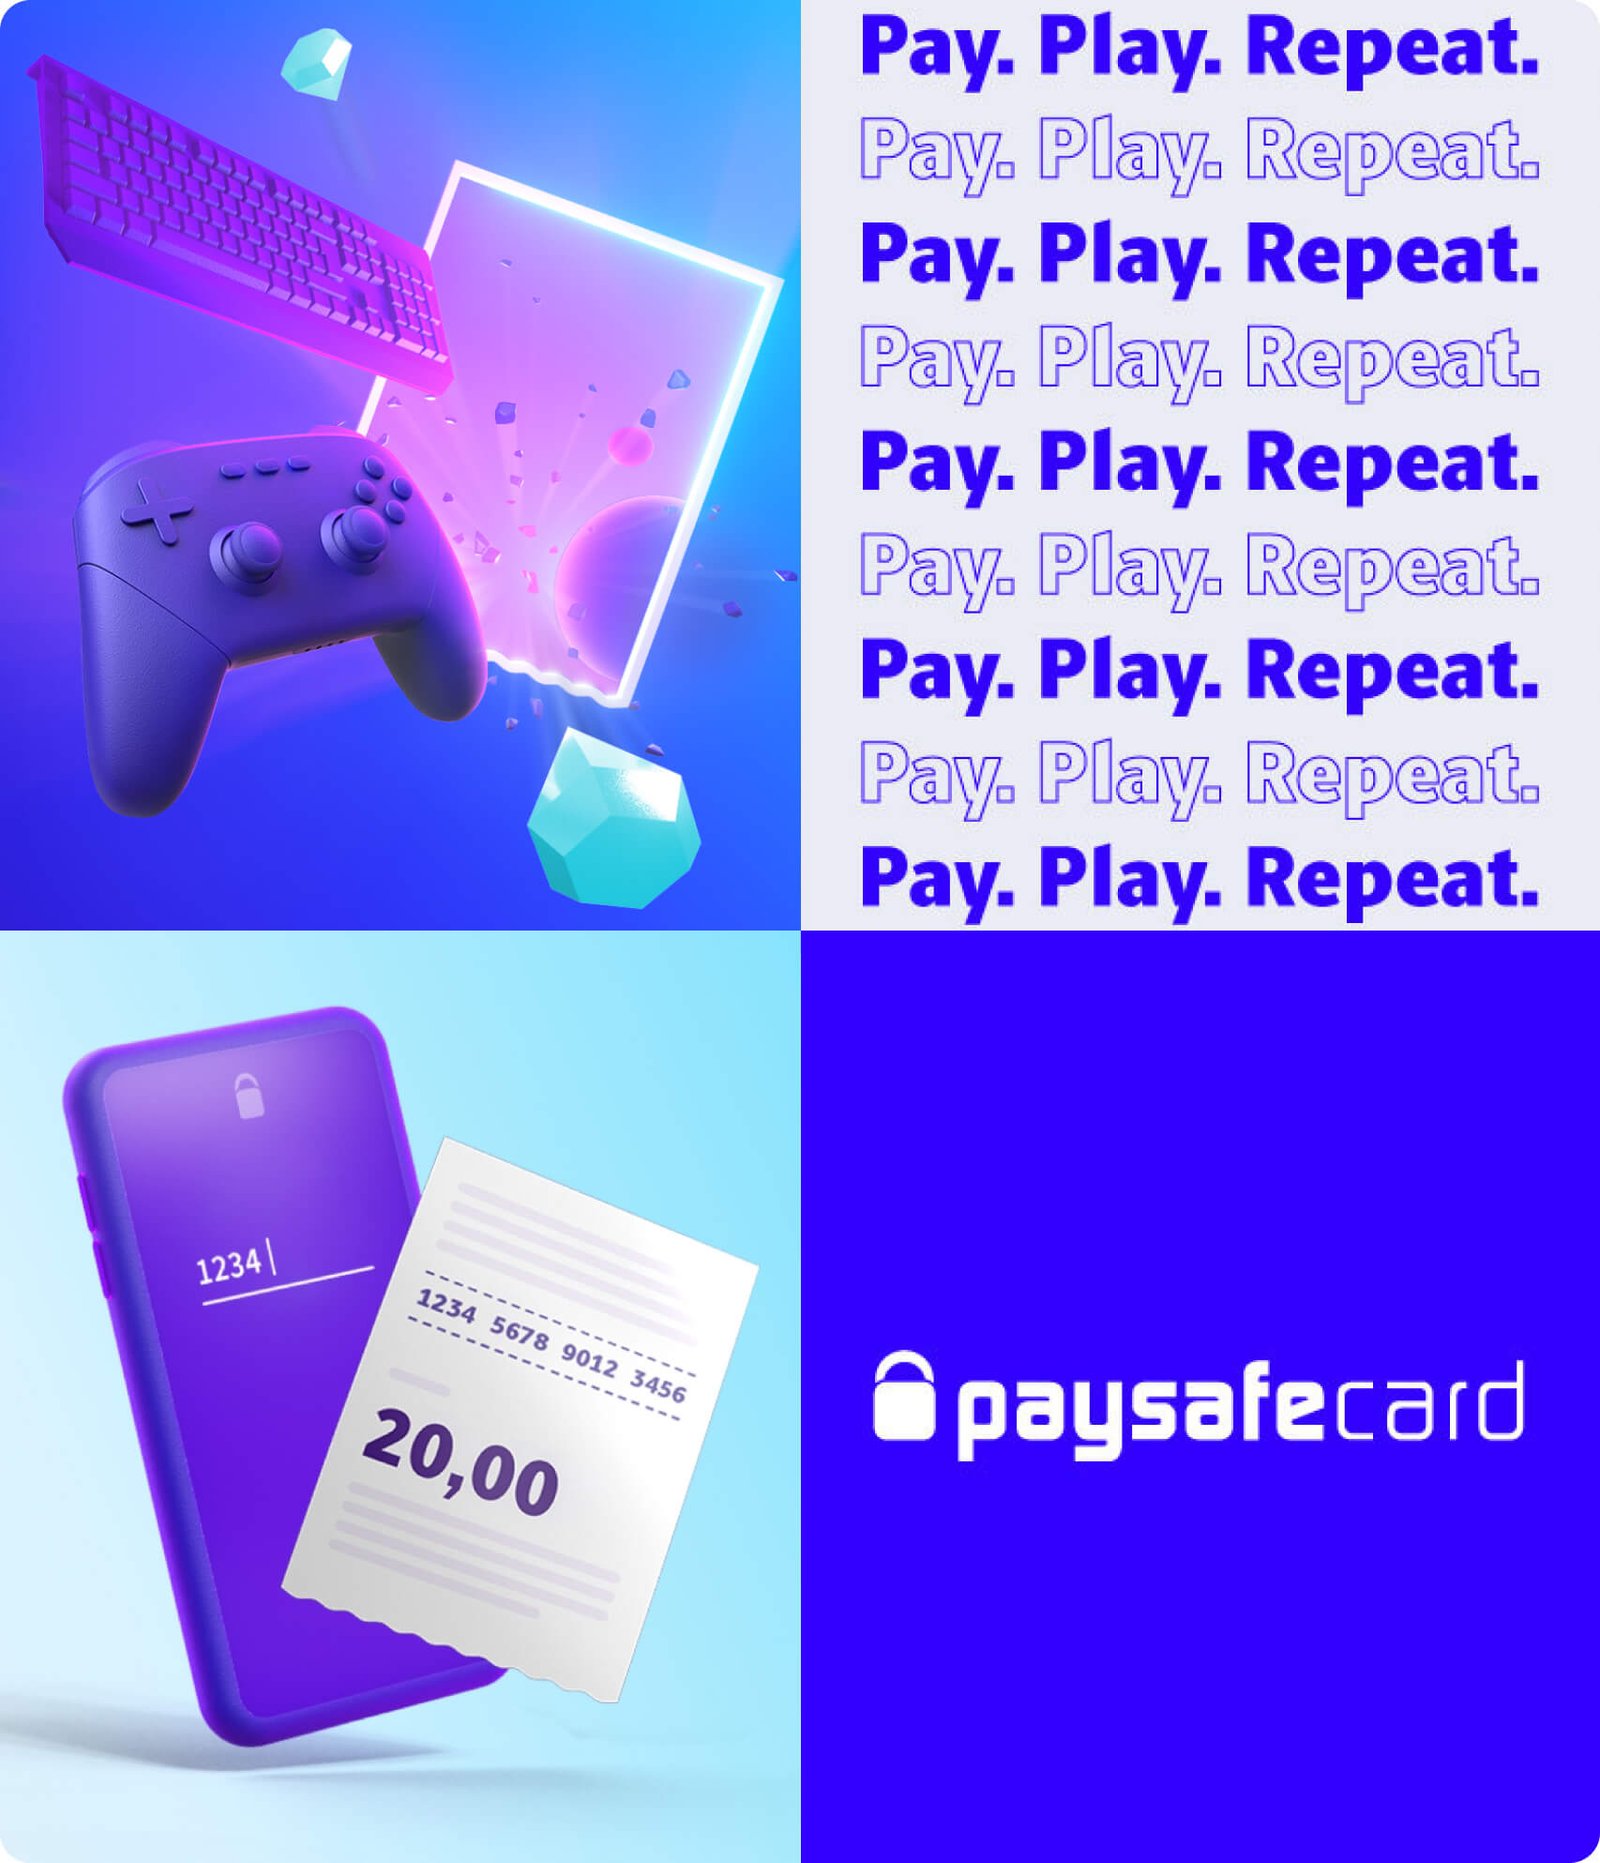 paysafecard provides the gateway to play by allowing customers pay cash online